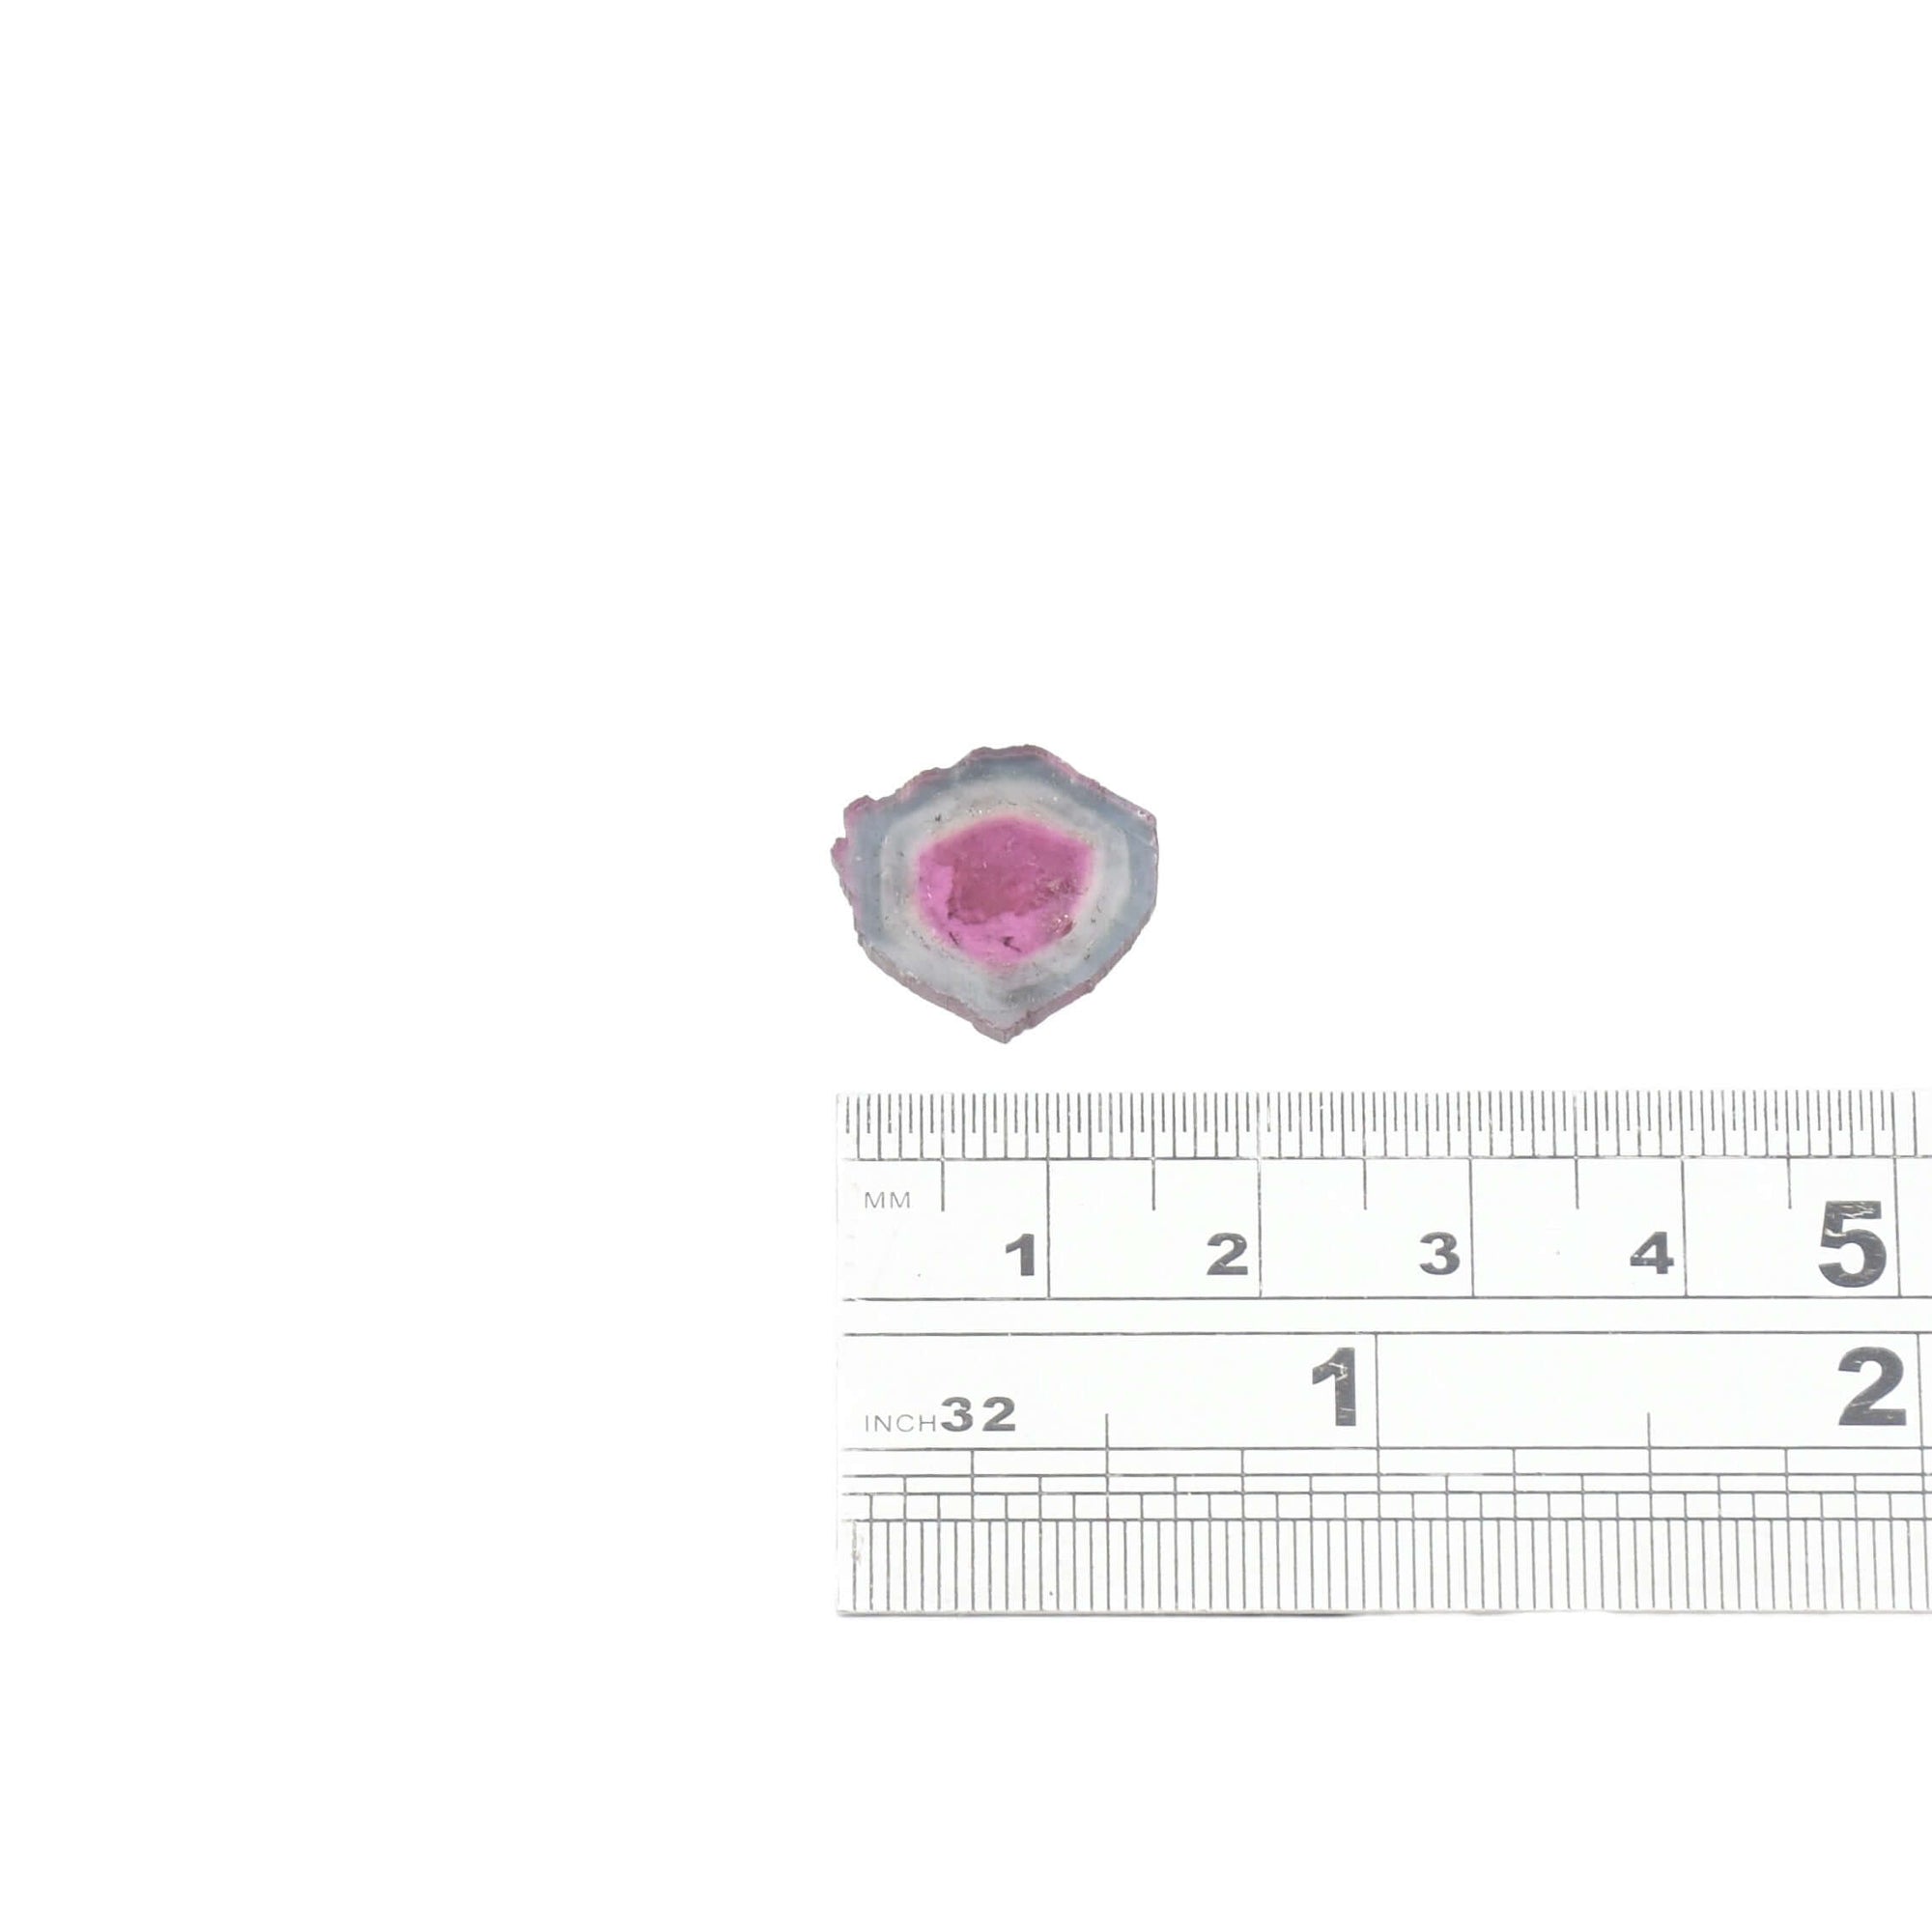 This pale blue and pale pink watermelon tourmaline, raw, is ready for a custom watermelon tourmaline ring design